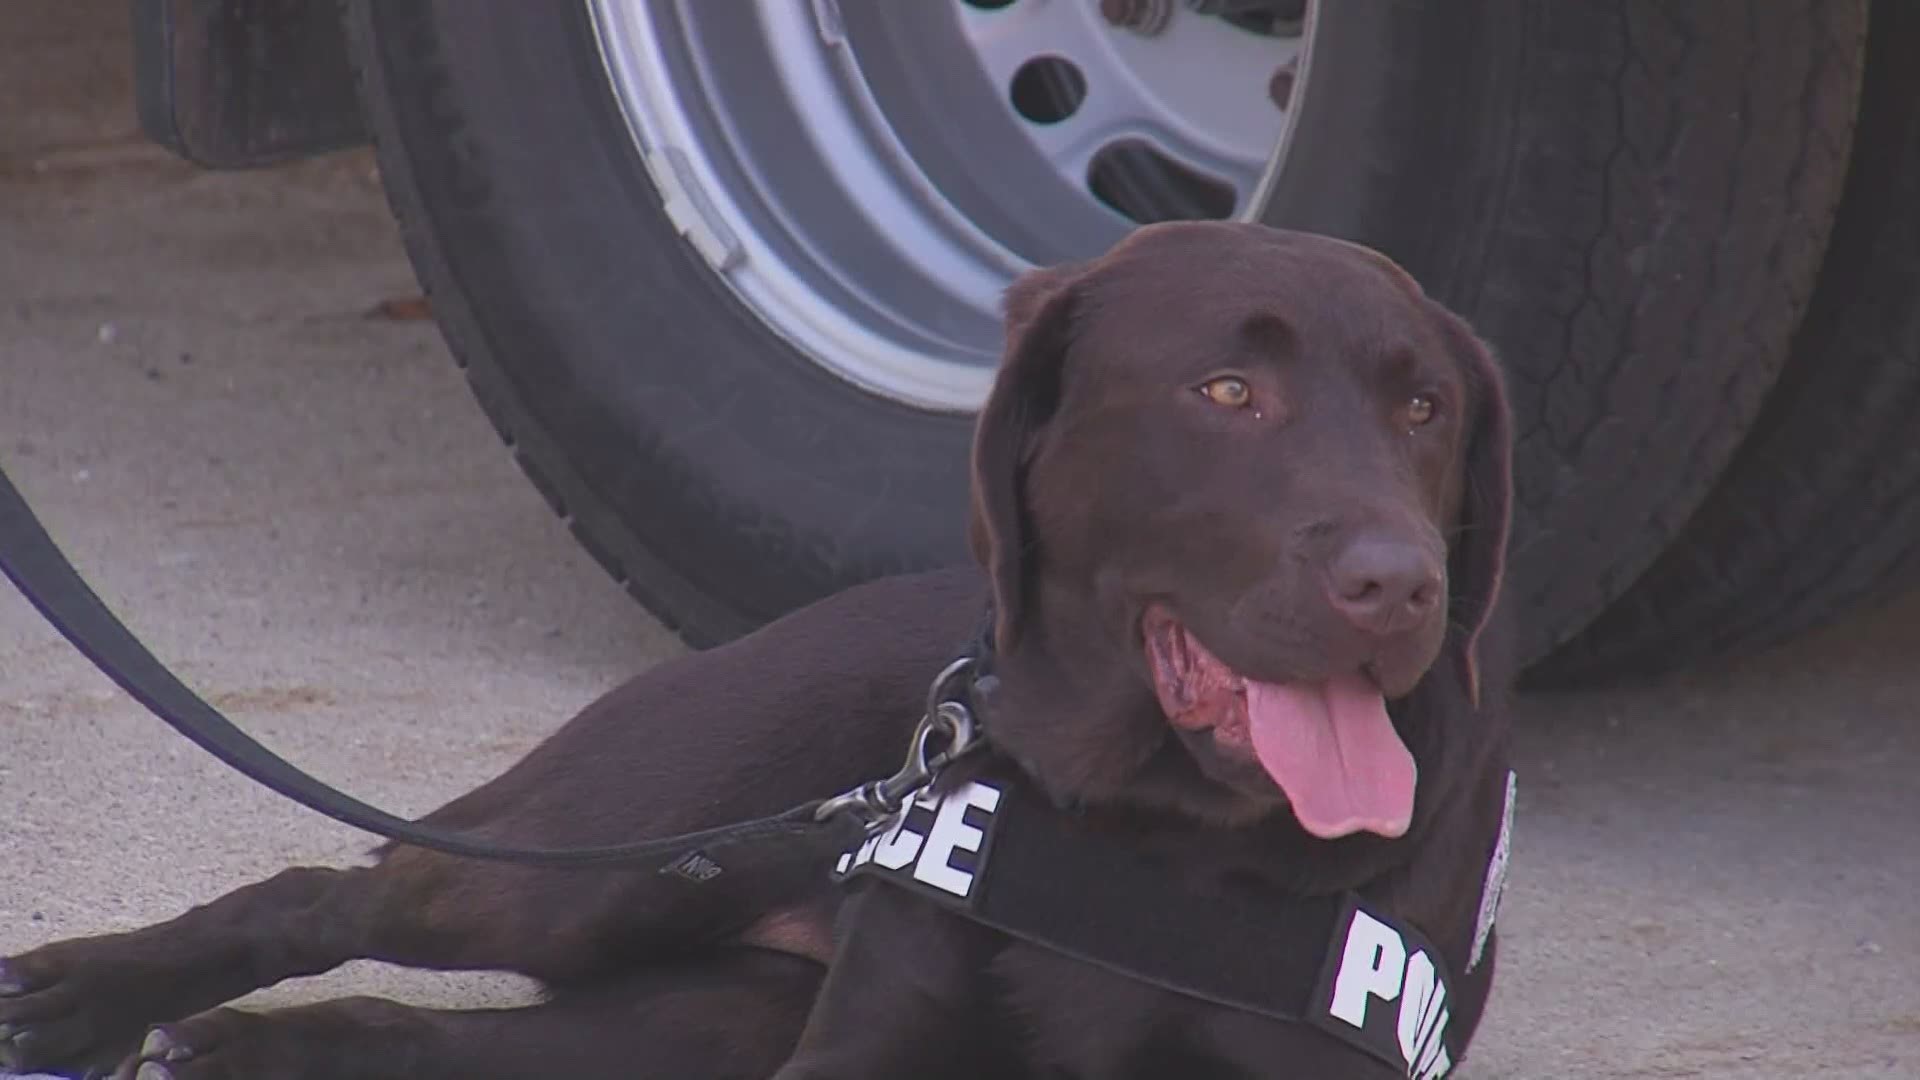 The new K-9, Moussee, will assist the department in child sex exploitation crimes.